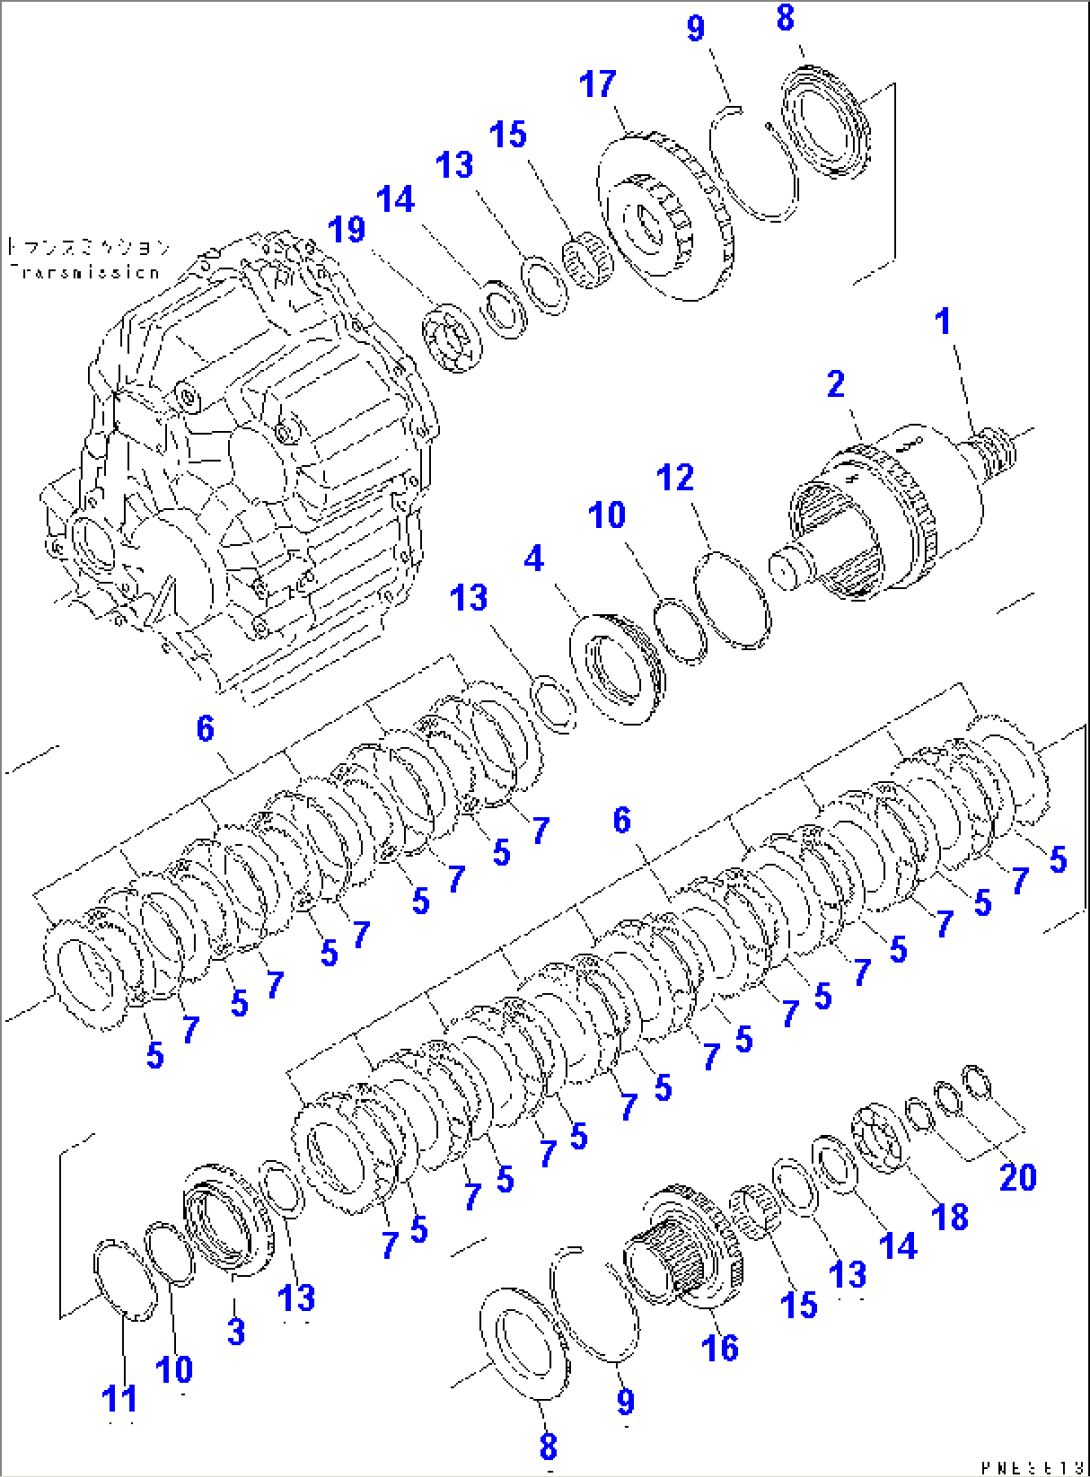 TRANSMISSION (FORWARD AND 2ND CLUTCH)